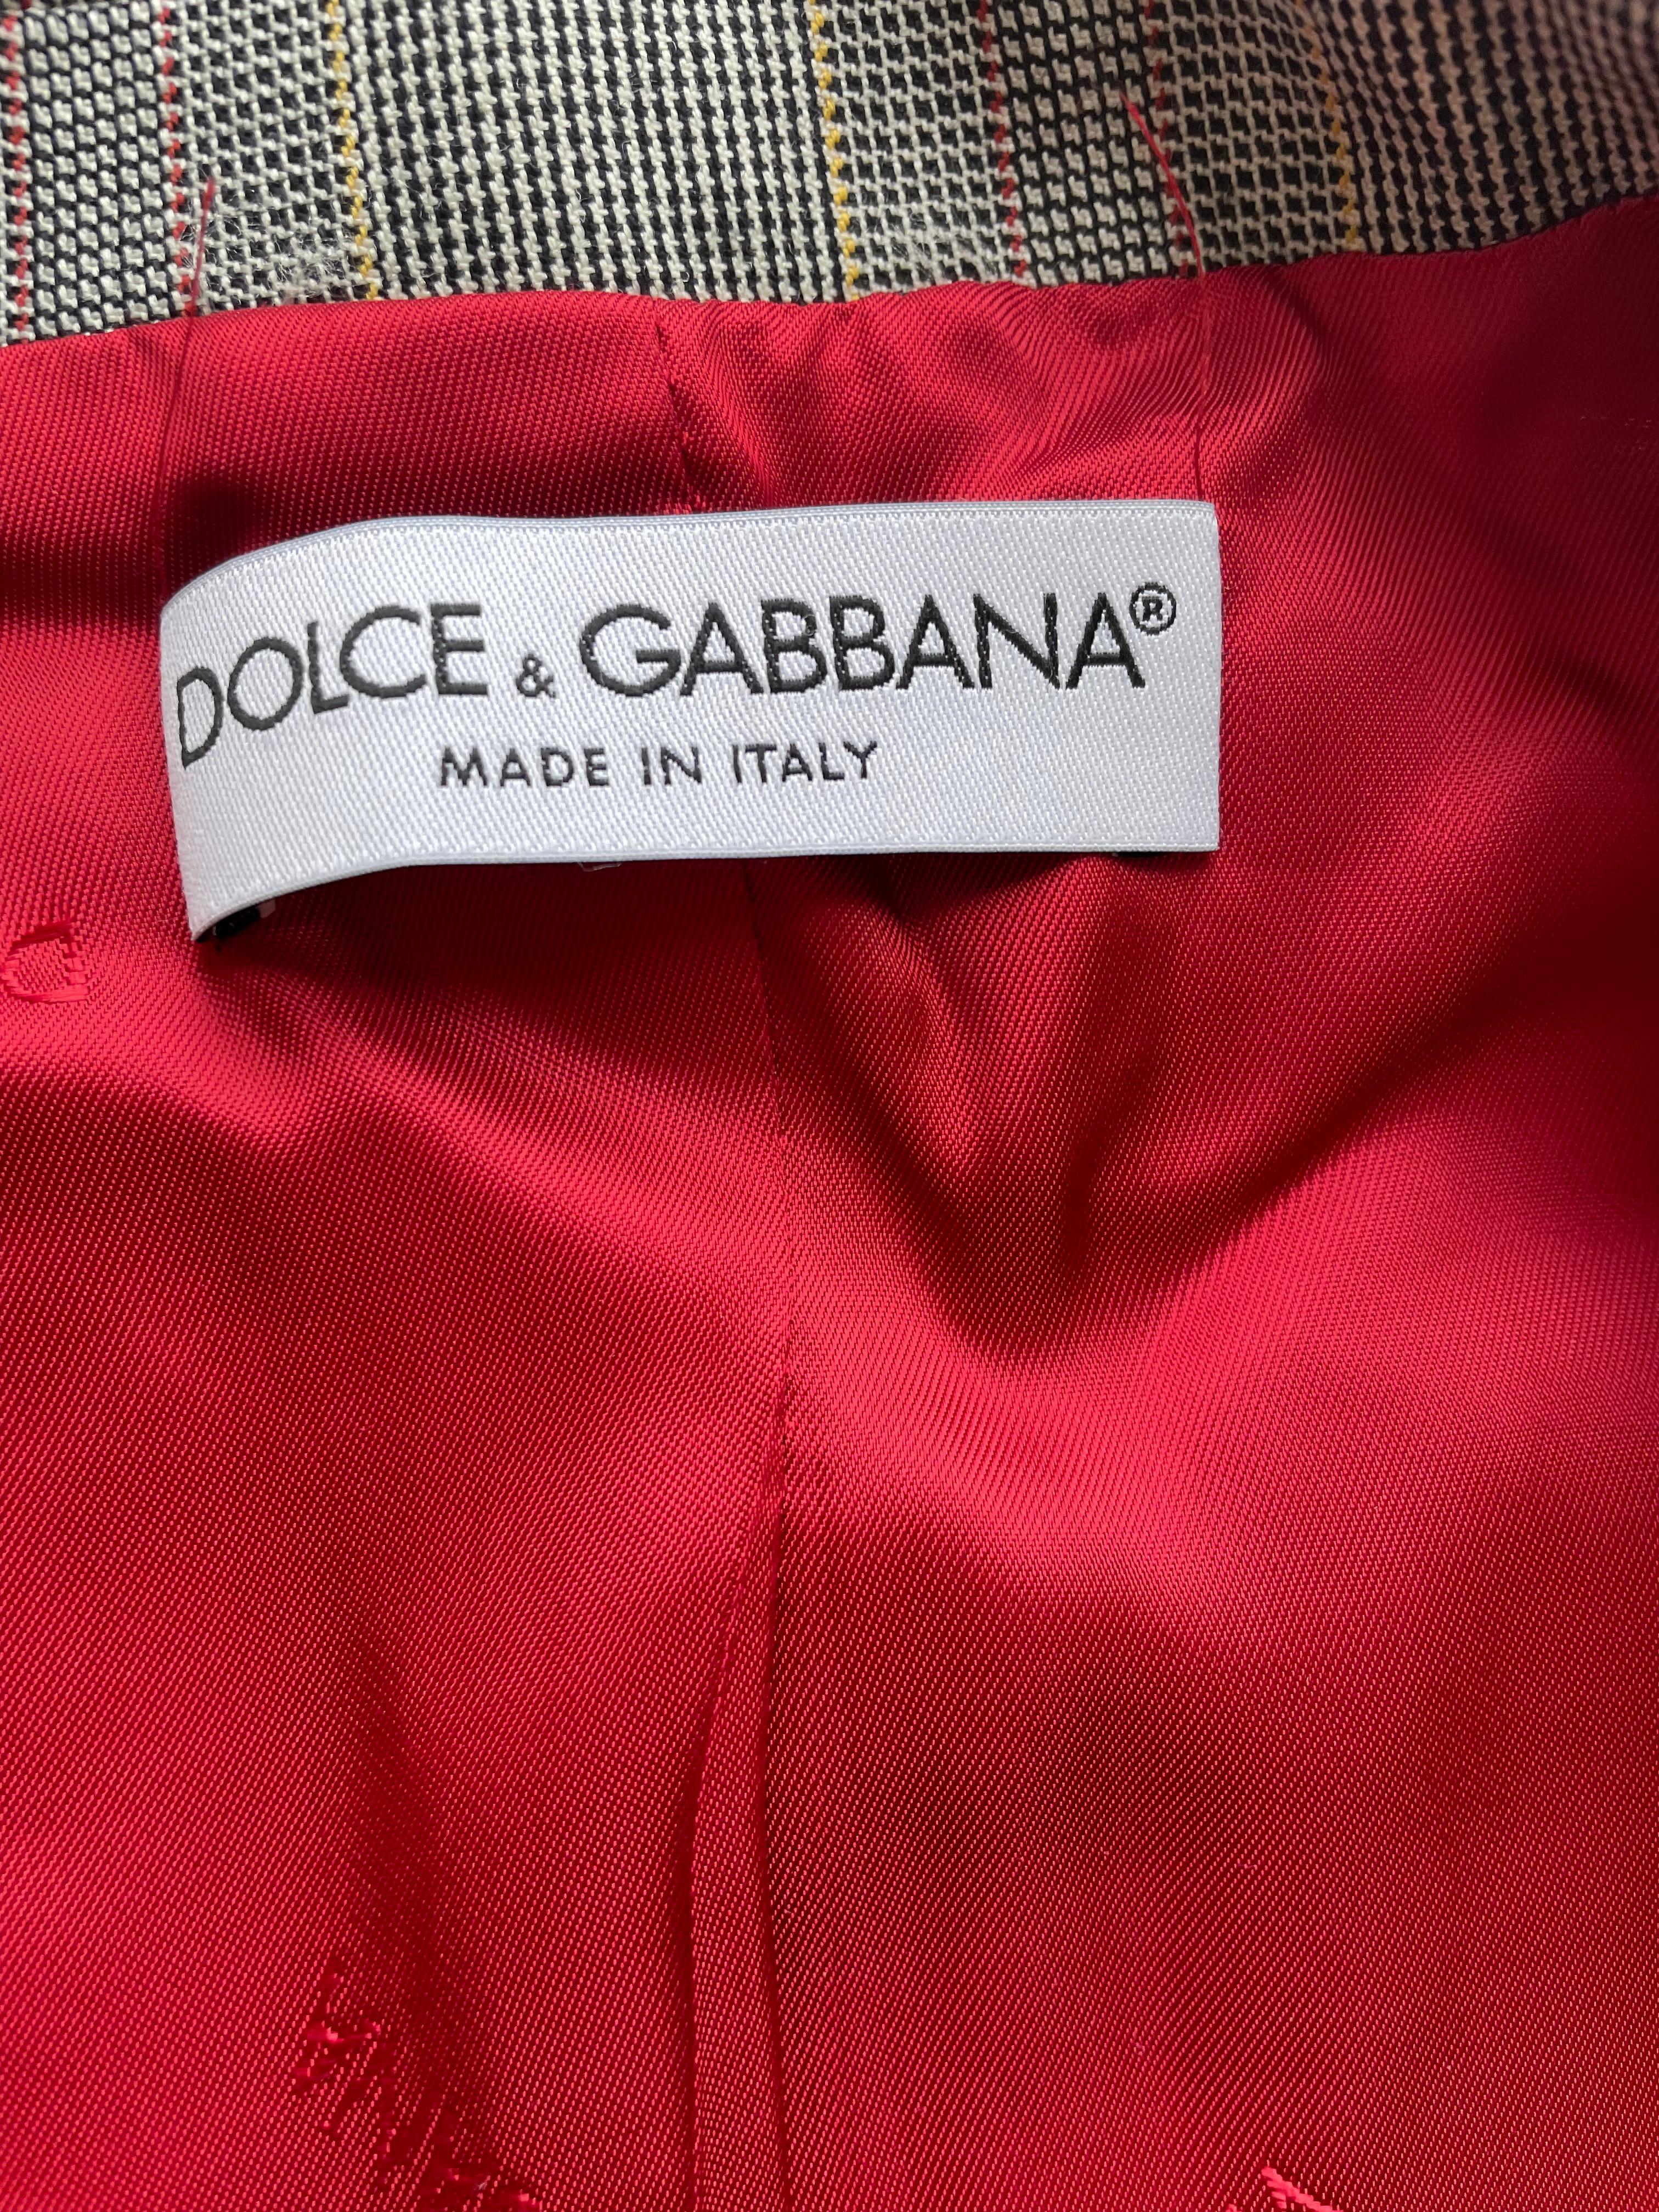 Dolce and Gabbana Wool Plaid Peak Lapel Blazer with Matching Pants Suit For Sale 6